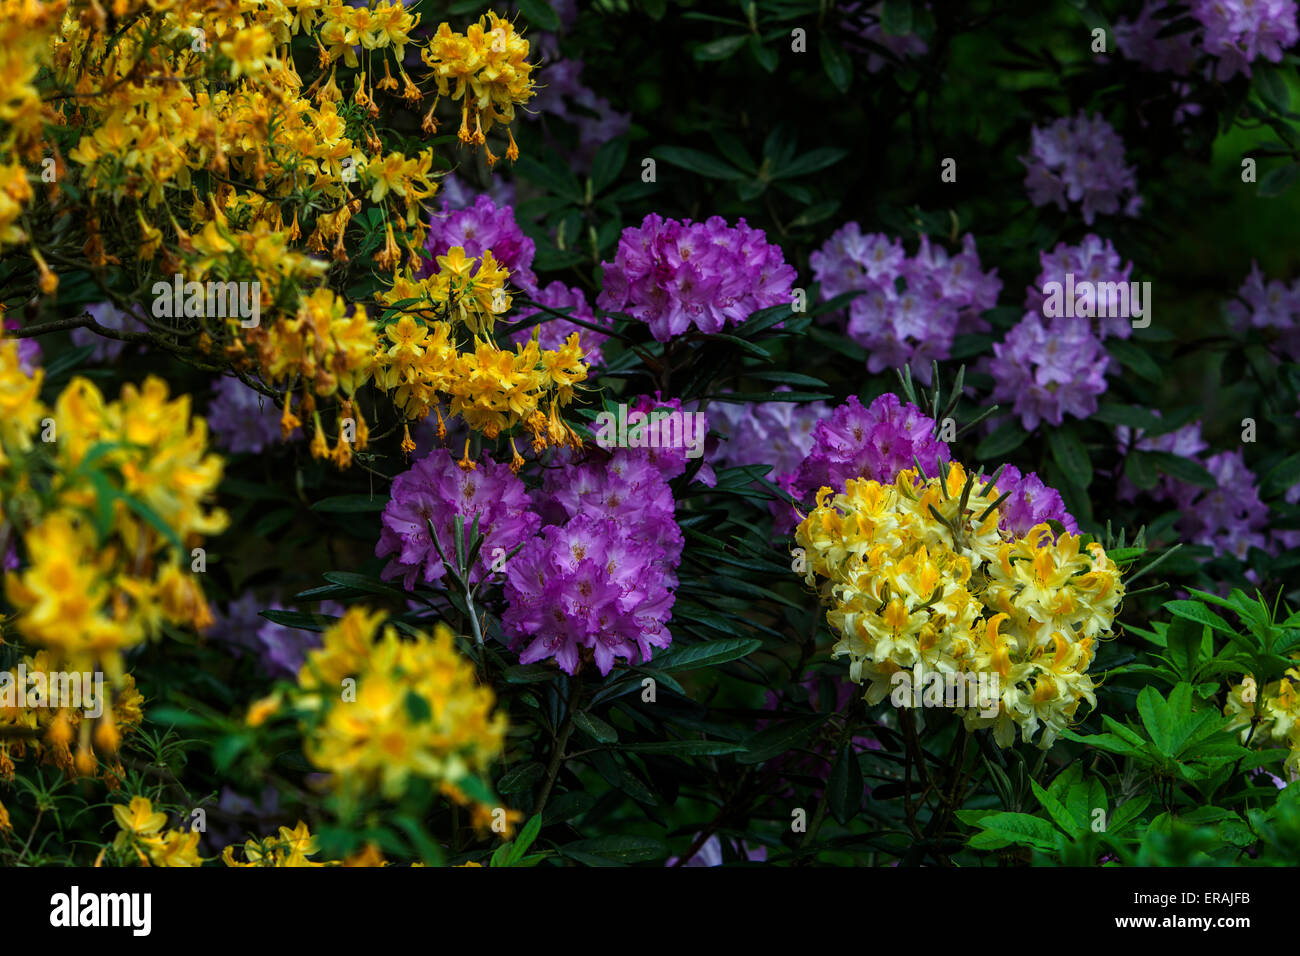 Rhododendron in bloom Stock Photo